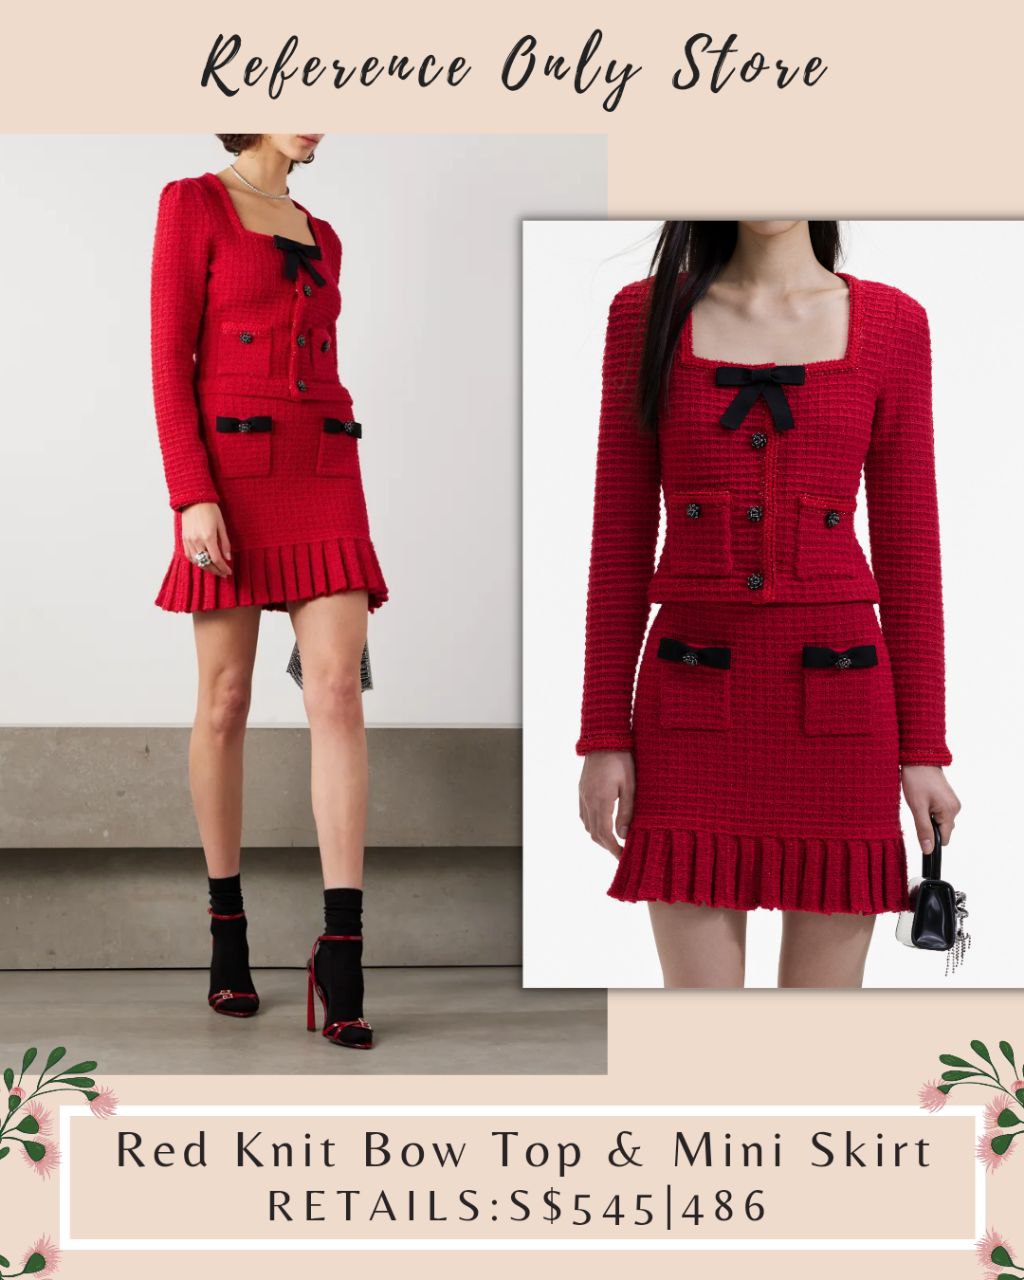 SP Red knit bow top & mini skirt set